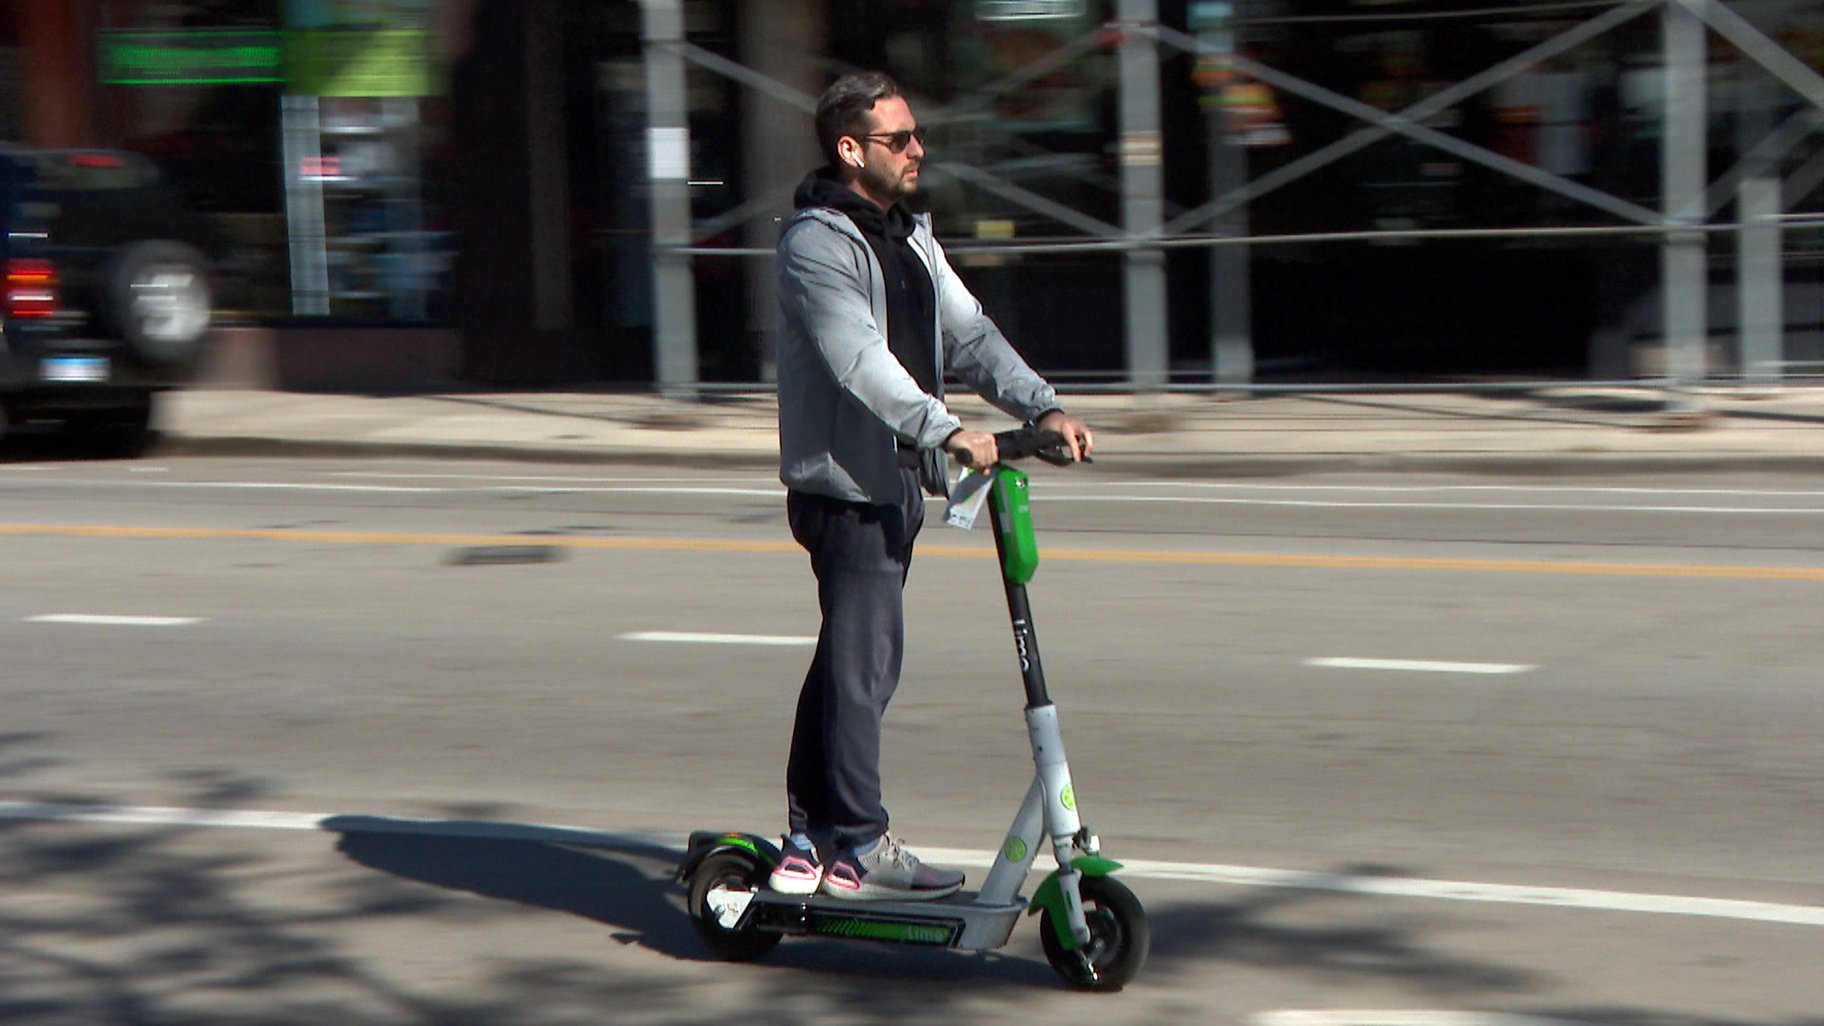 Low caps on e-scooter speeds encourage sidewalk riding